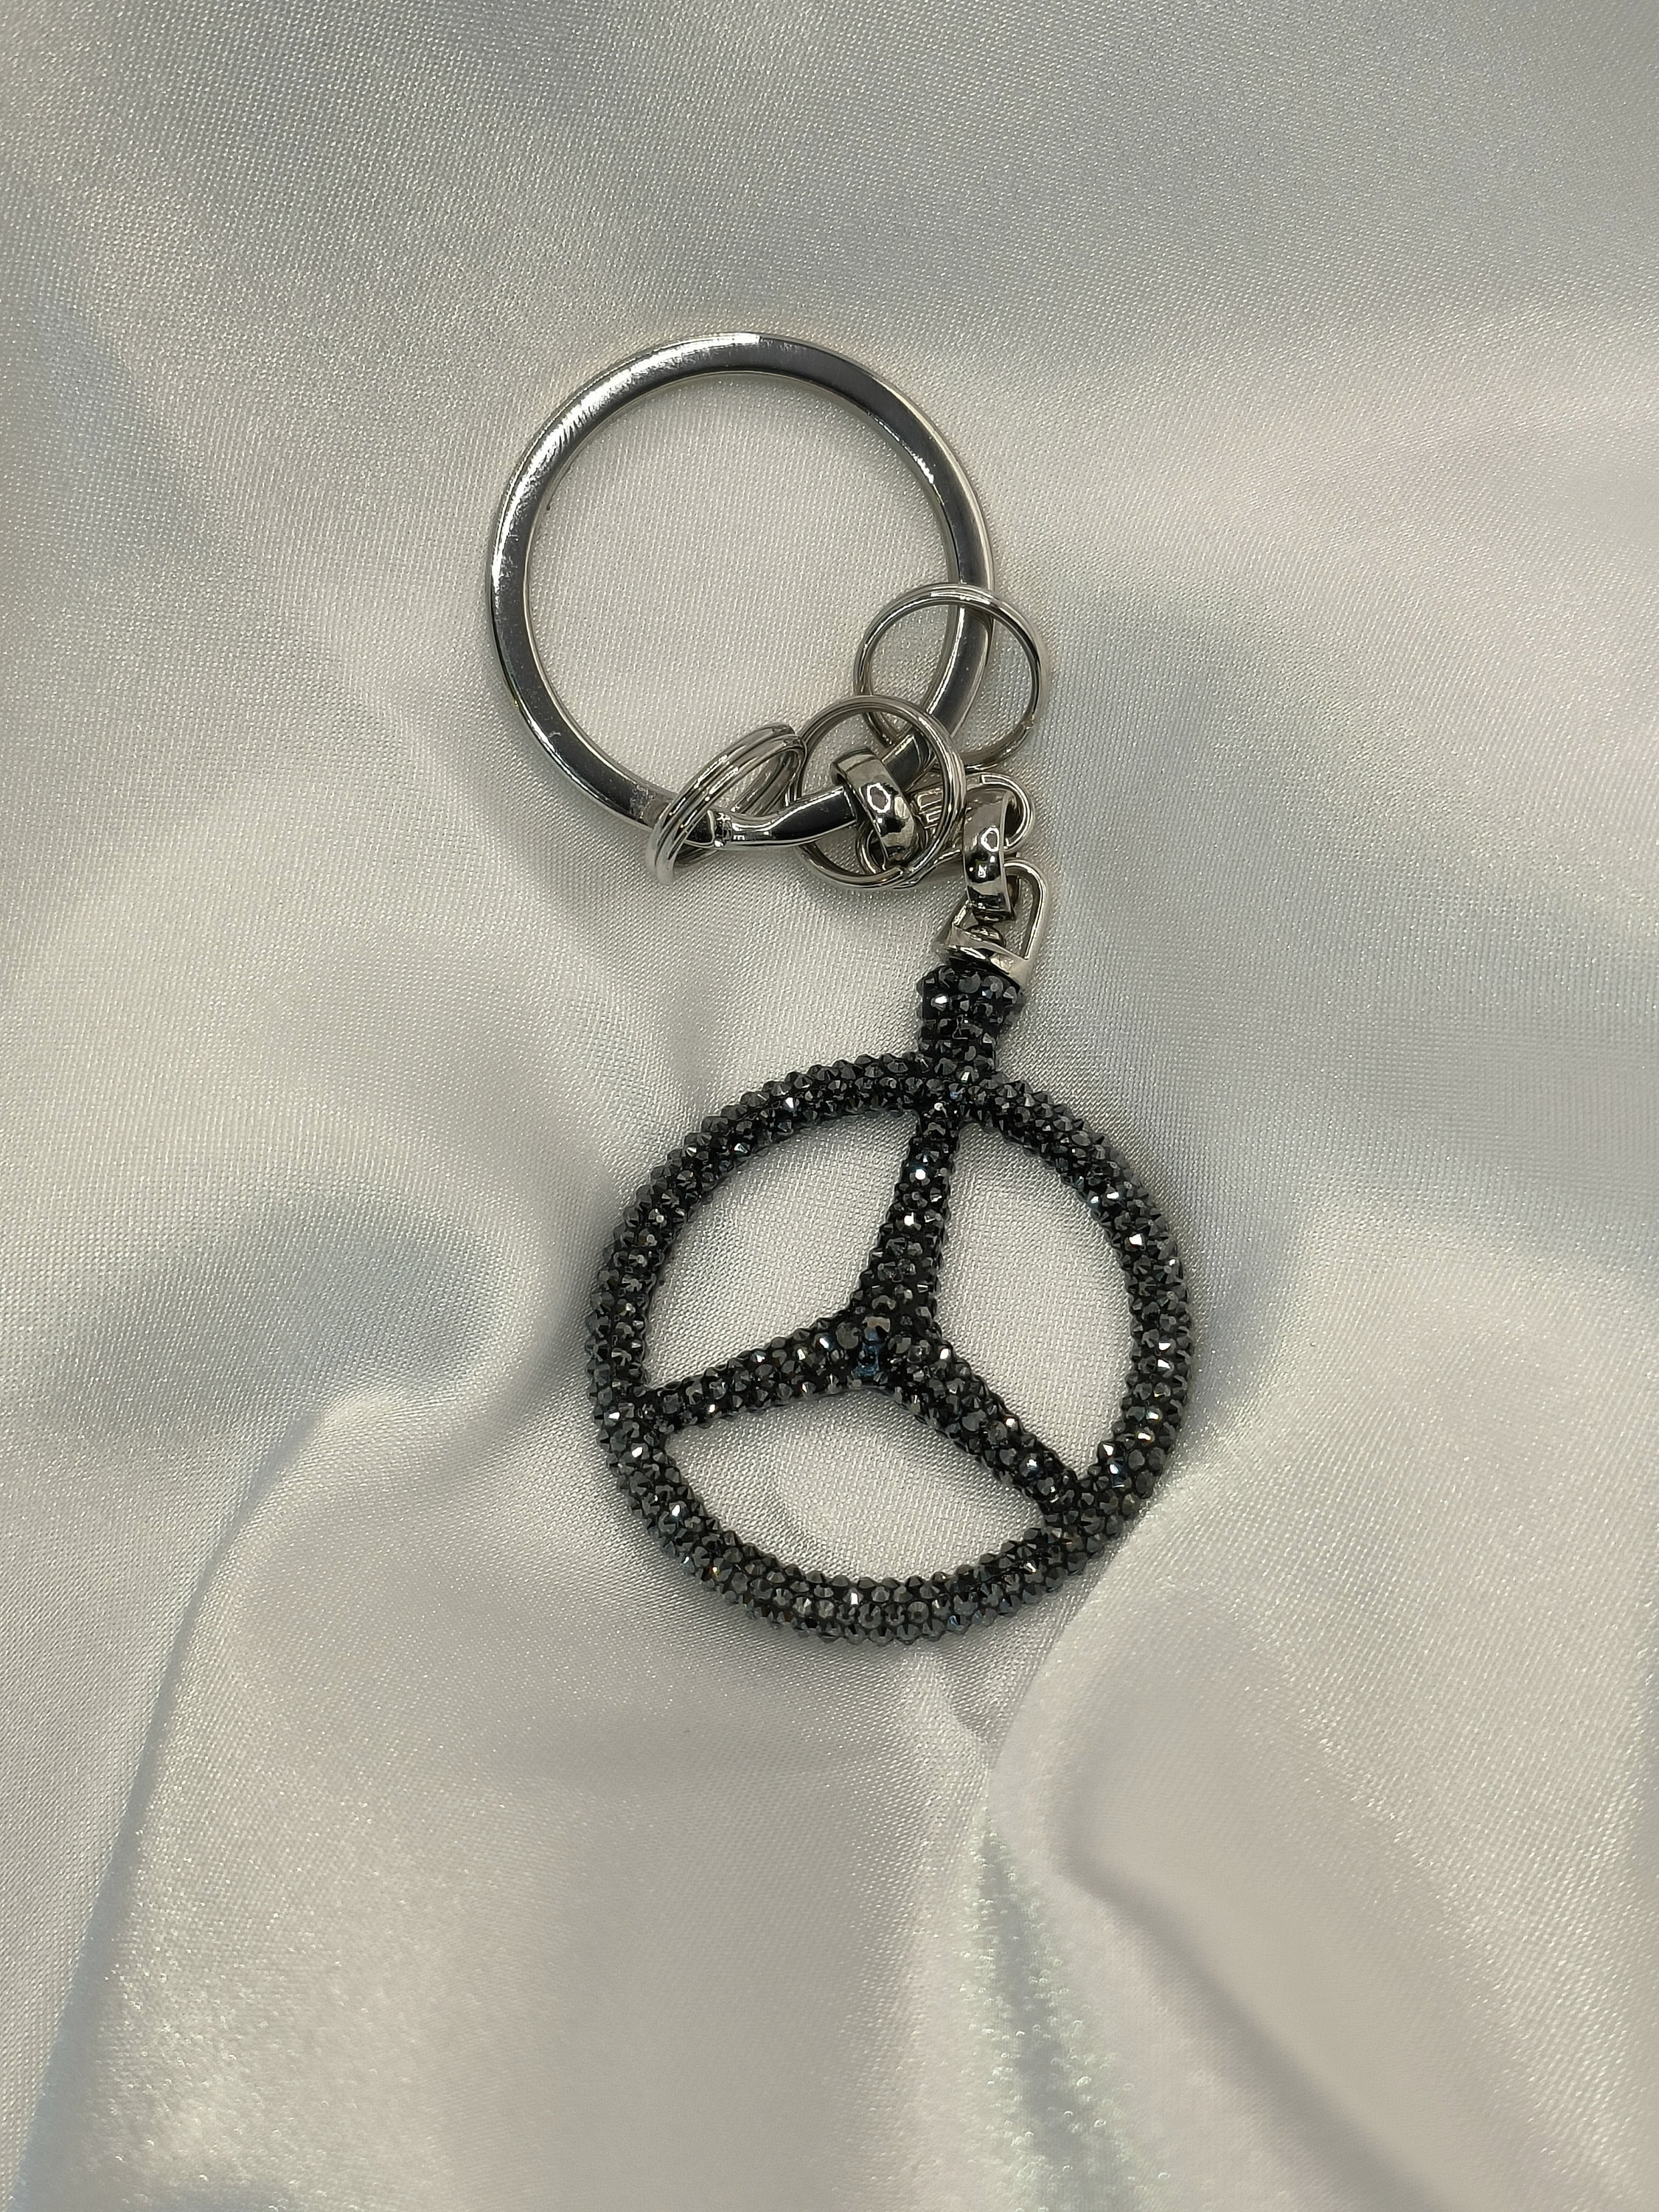 eShop24x7 MERCEDES alloy metal steel imported key ring car logo Key Chain  Price in India - Buy eShop24x7 MERCEDES alloy metal steel imported key ring  car logo Key Chain online at Flipkart.com